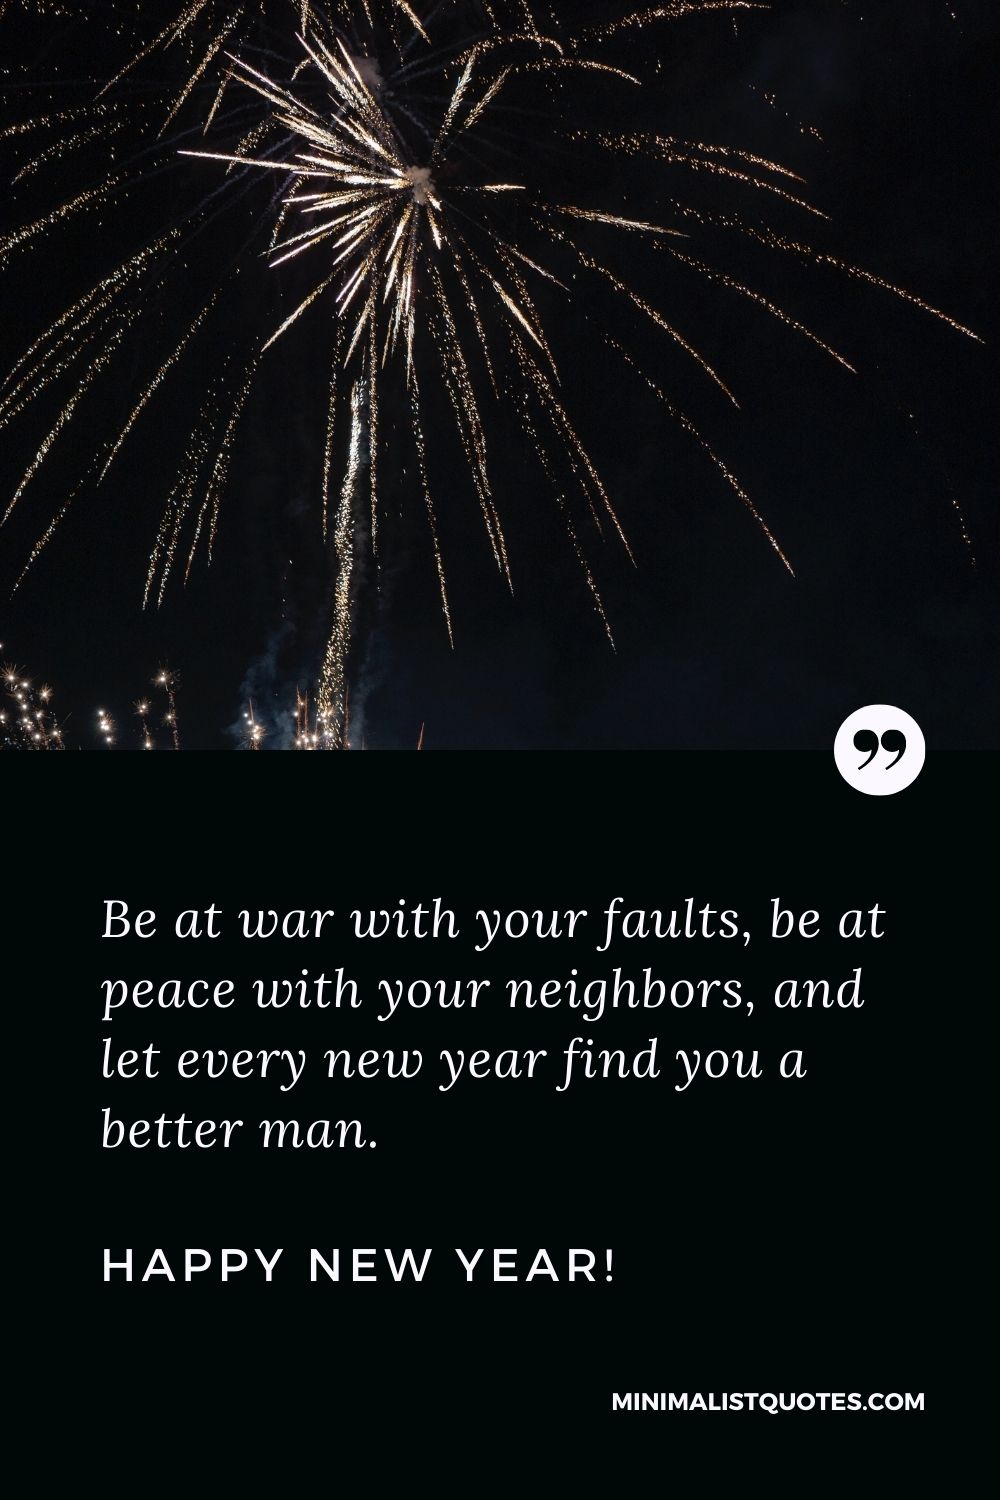 Be at war with your faults, be at peace with your neighbors, and ...